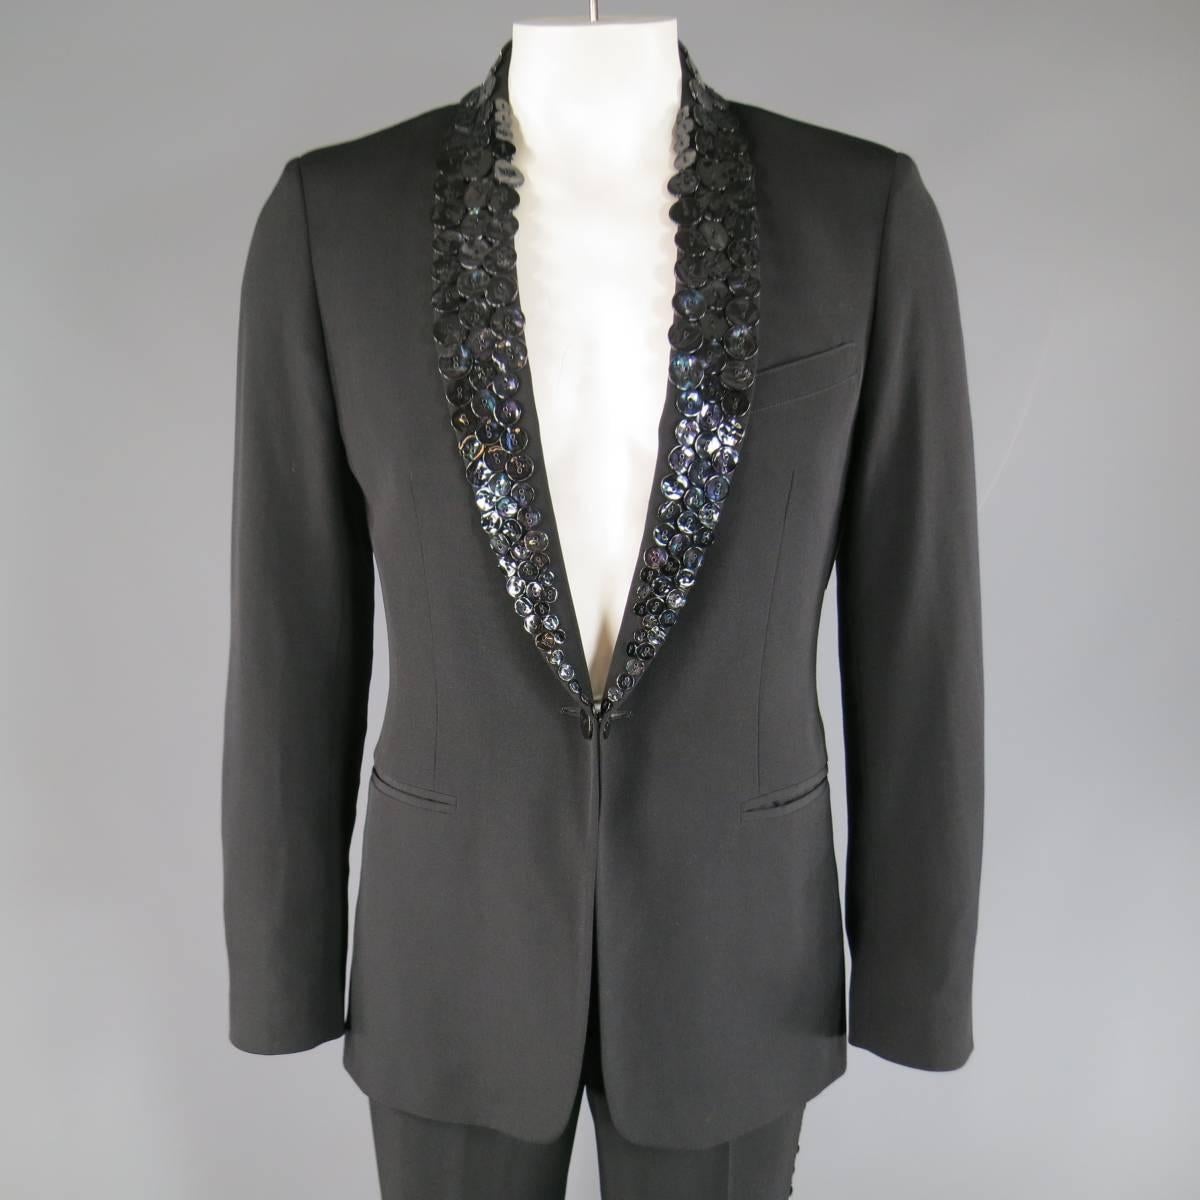 Vintage JEAN PAUL GAULTIER suit in a light weight black wool / mohair blend fabric includes a single button, sport coat featuring a shawl collar completely embellished with black petrol iridescent buttons and signature back tab and matching trousers